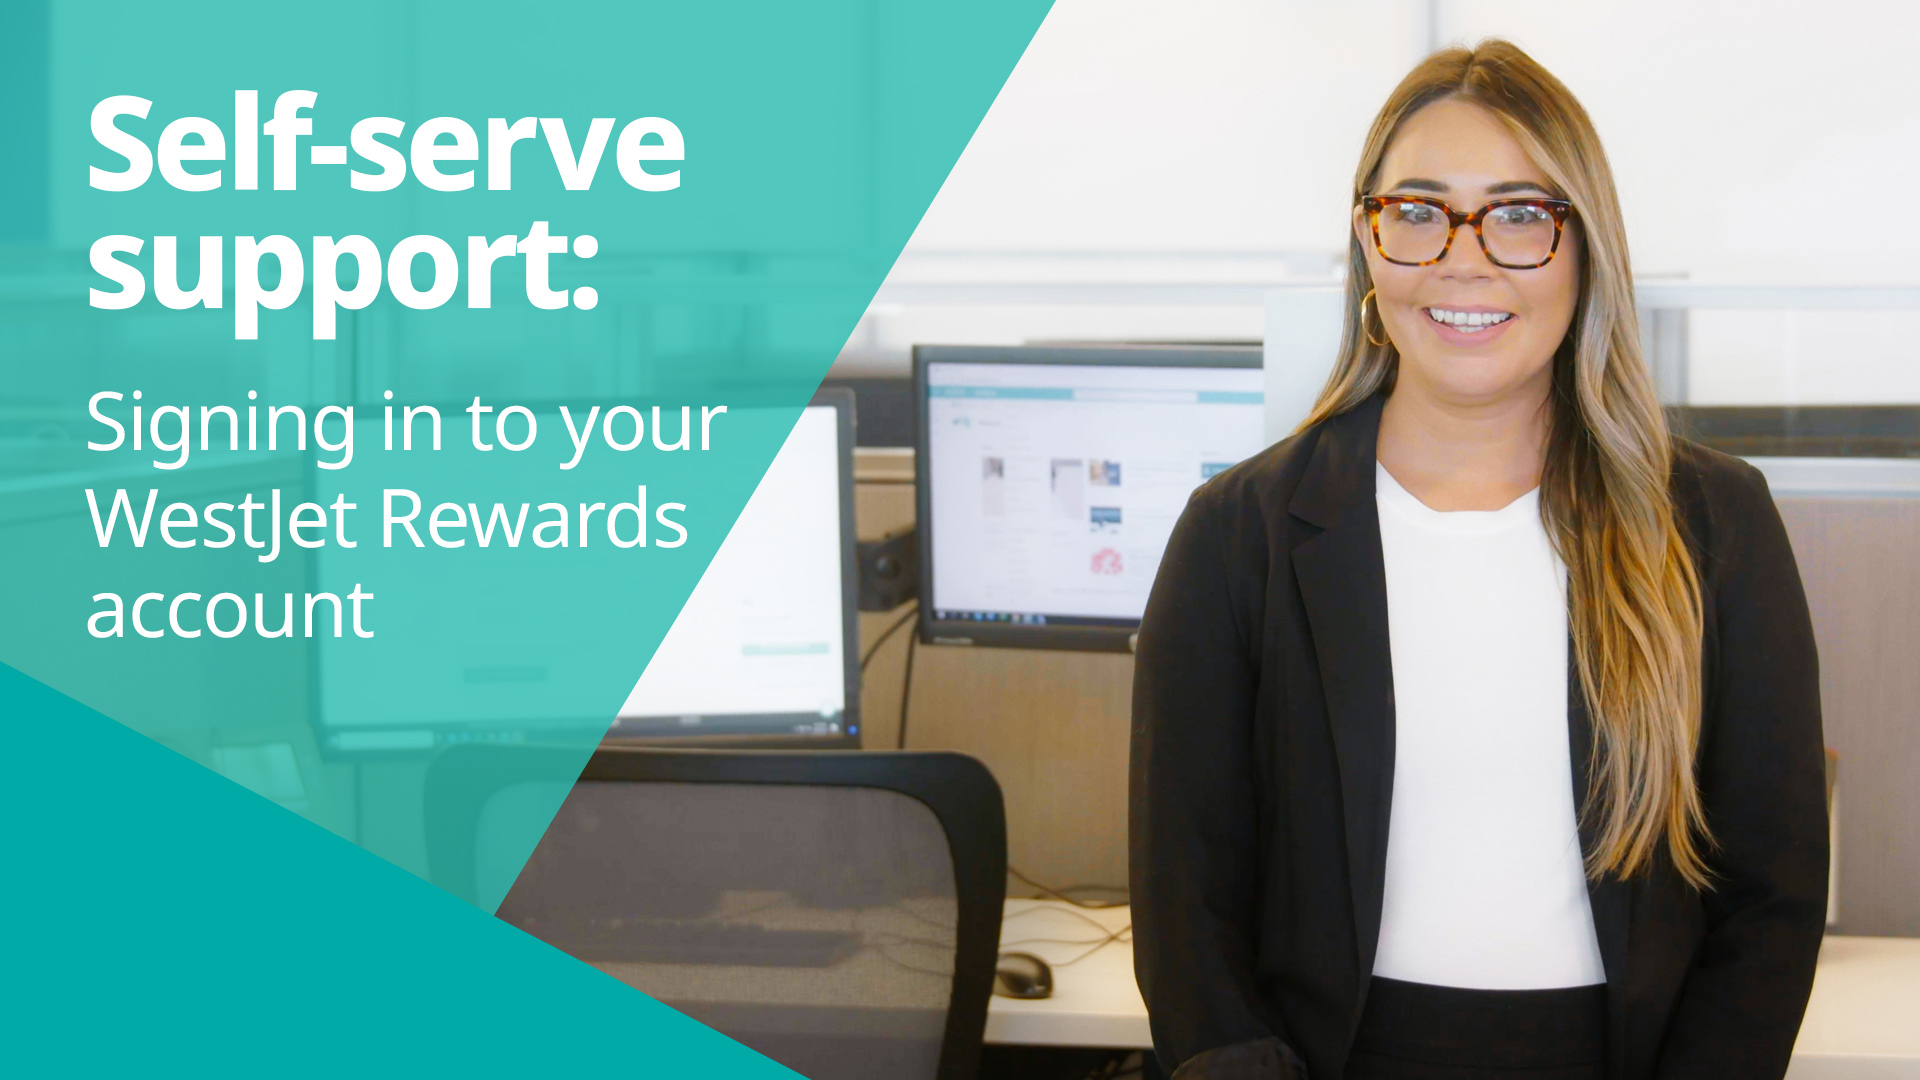 Self-serve-support: Signing in to your WestJet Rewards account with service agent Arianna